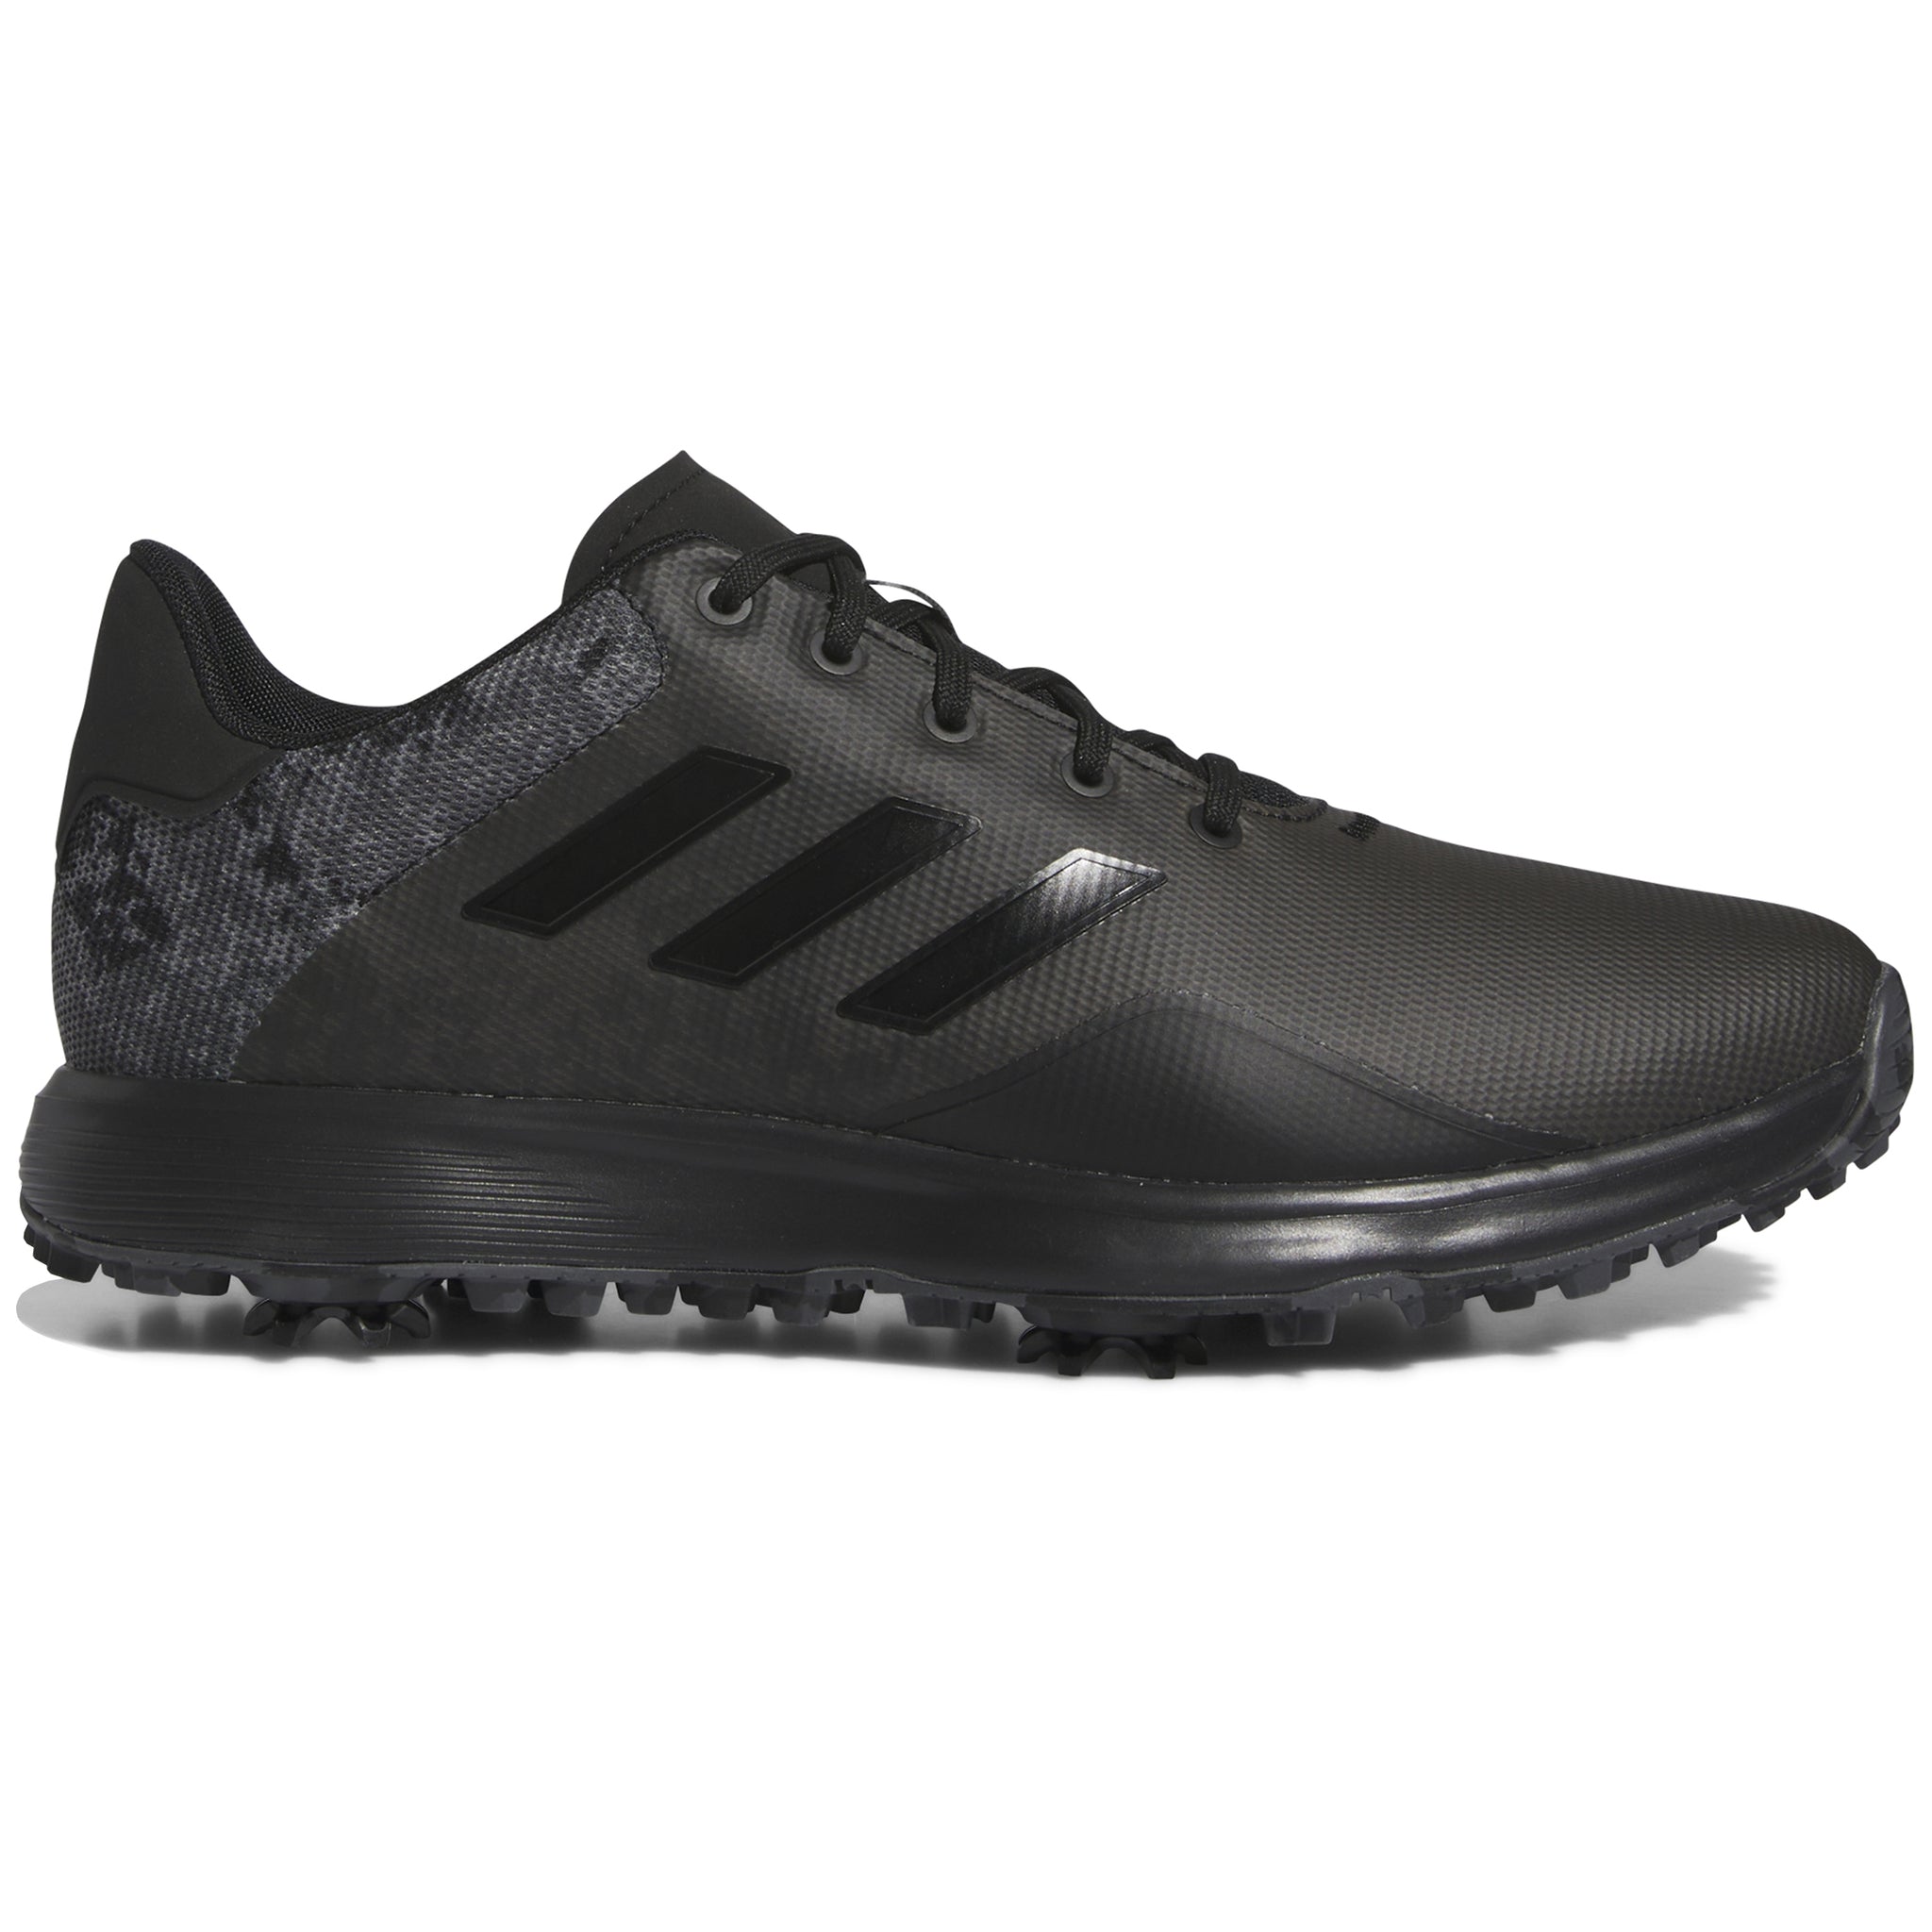 adidas S2G Spiked 23 Golf Shoes HP3233 Core Black Grey Six | Function18 ...